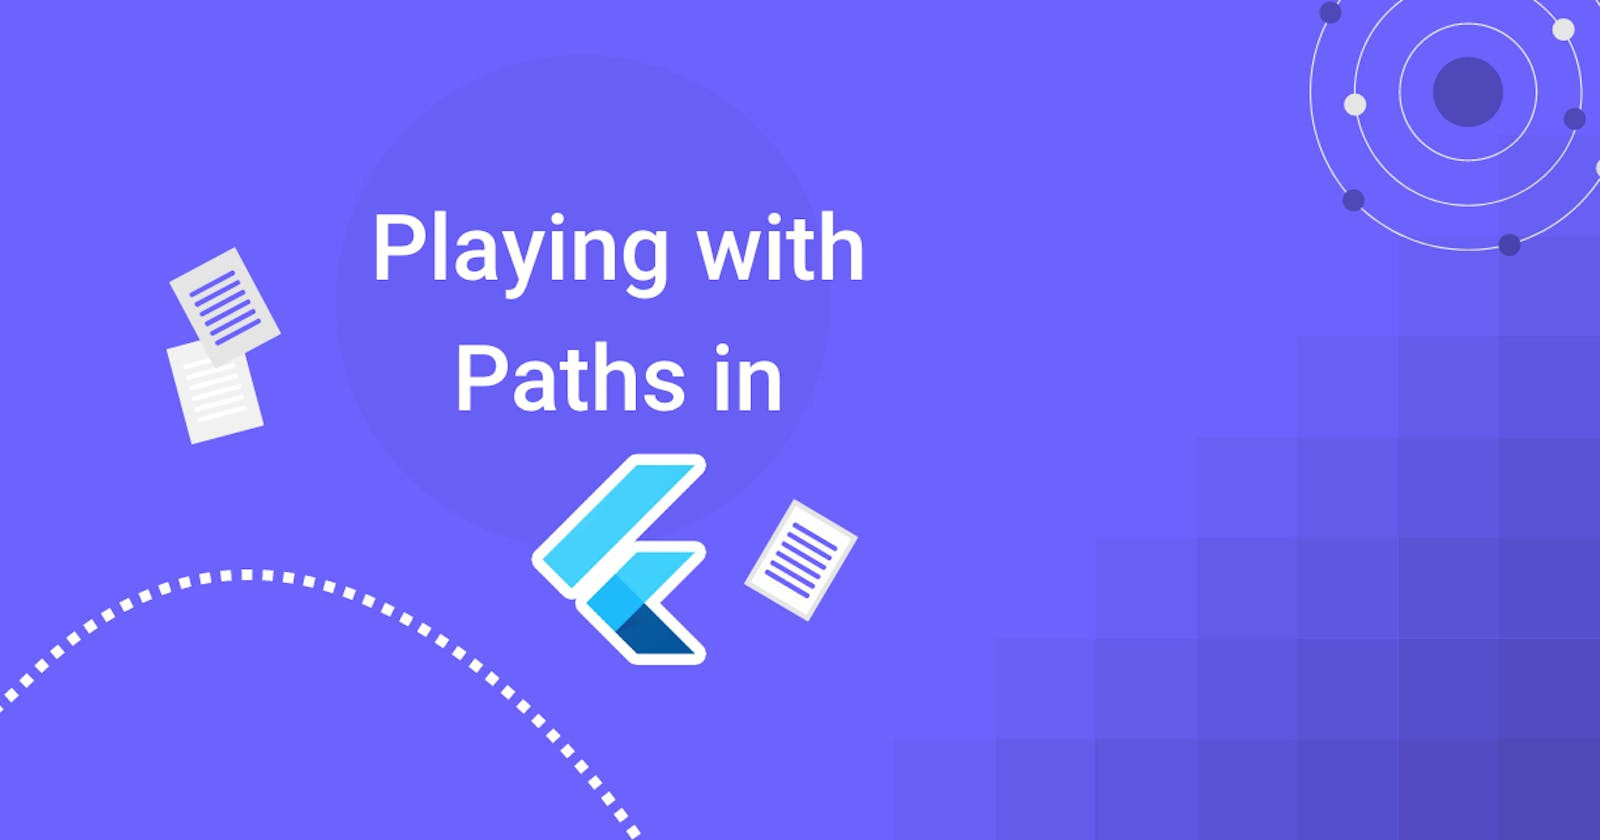 Playing with Paths in Flutter